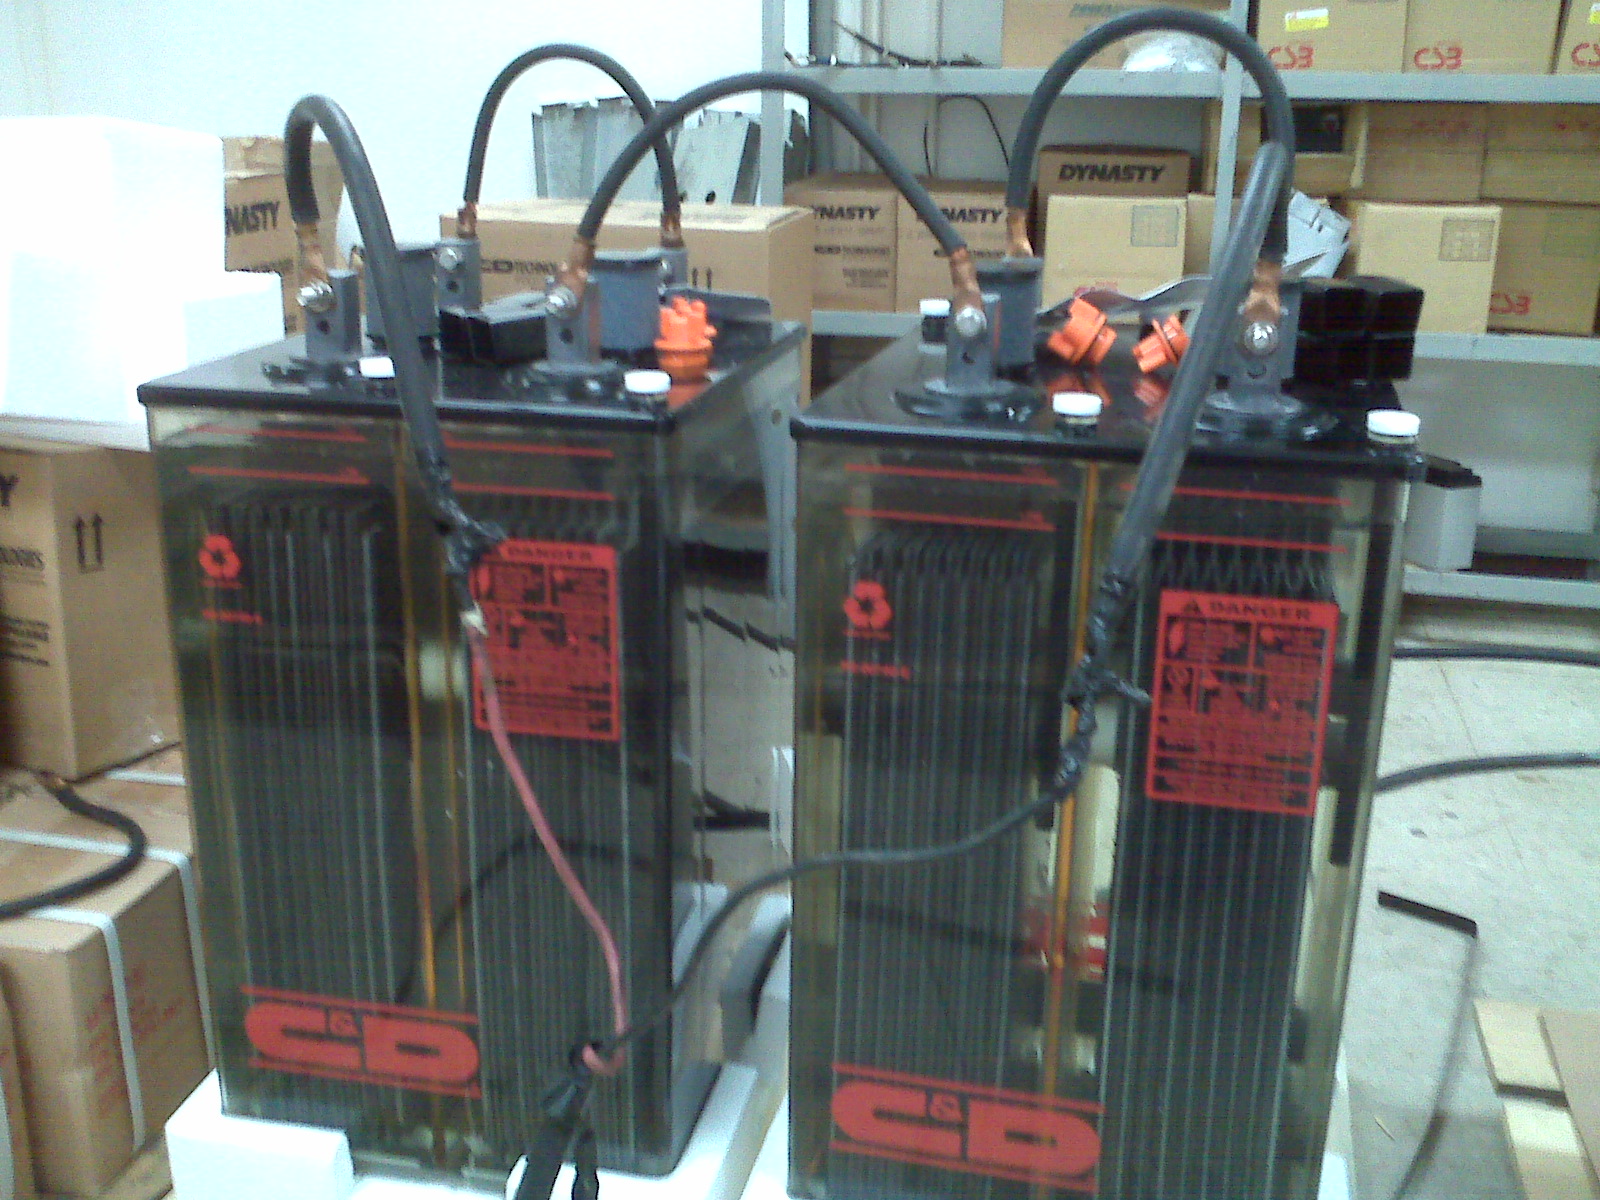 Charging Lead Acid Batteries With Smart Charger